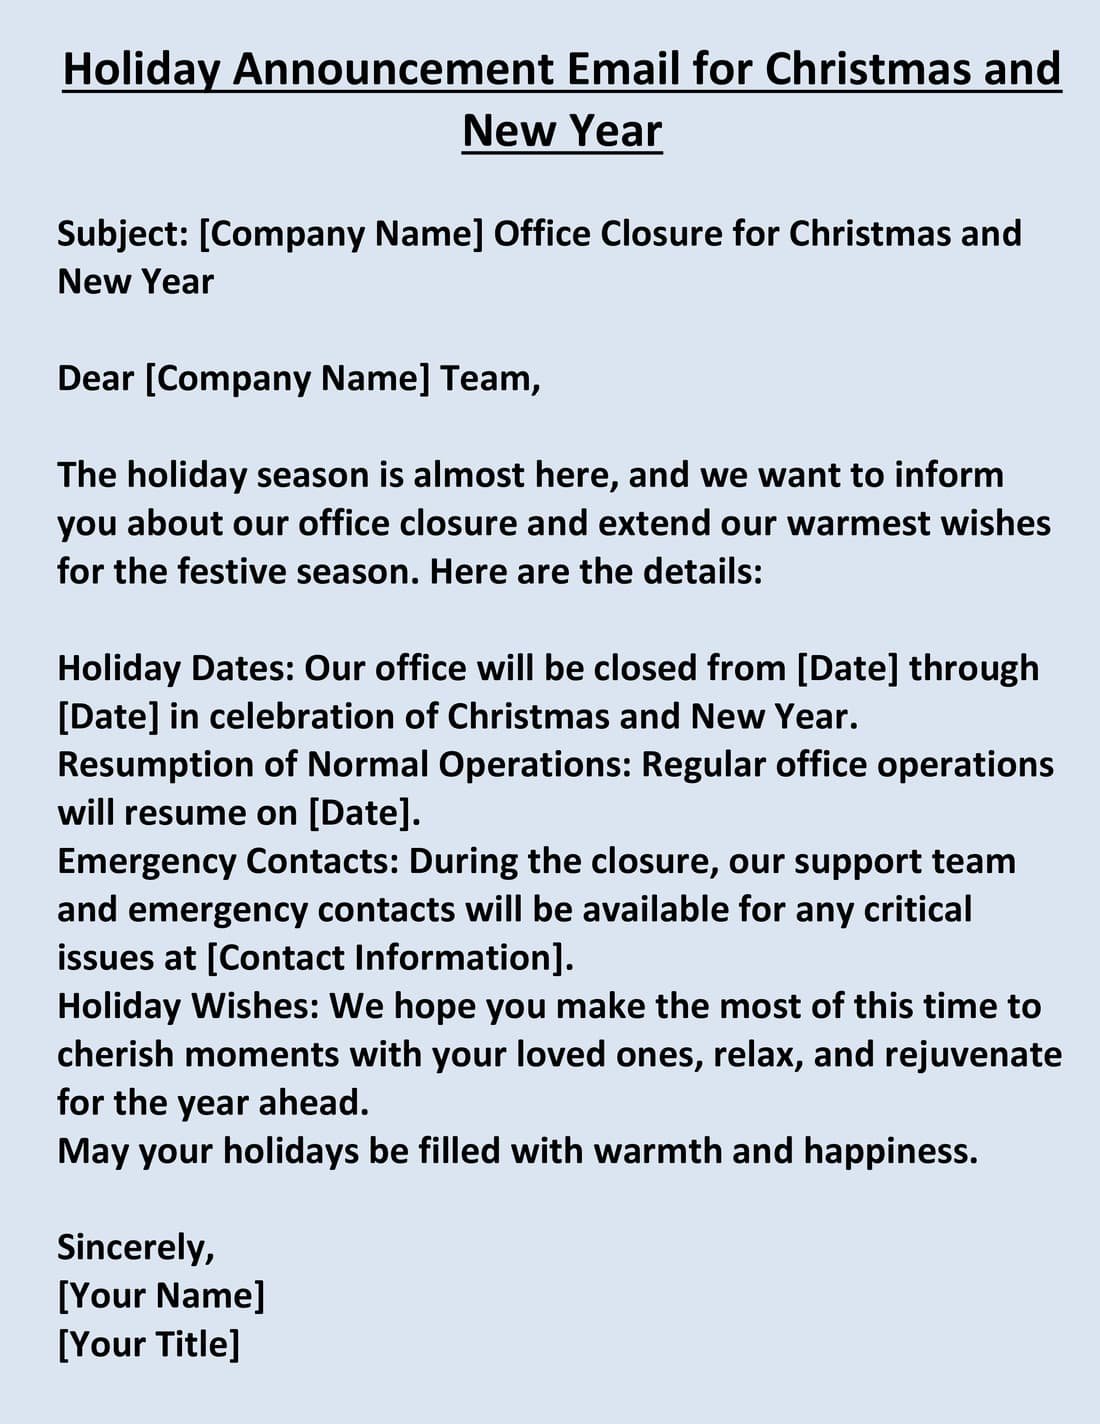 Holiday Announcement Email for Christmas and New Year